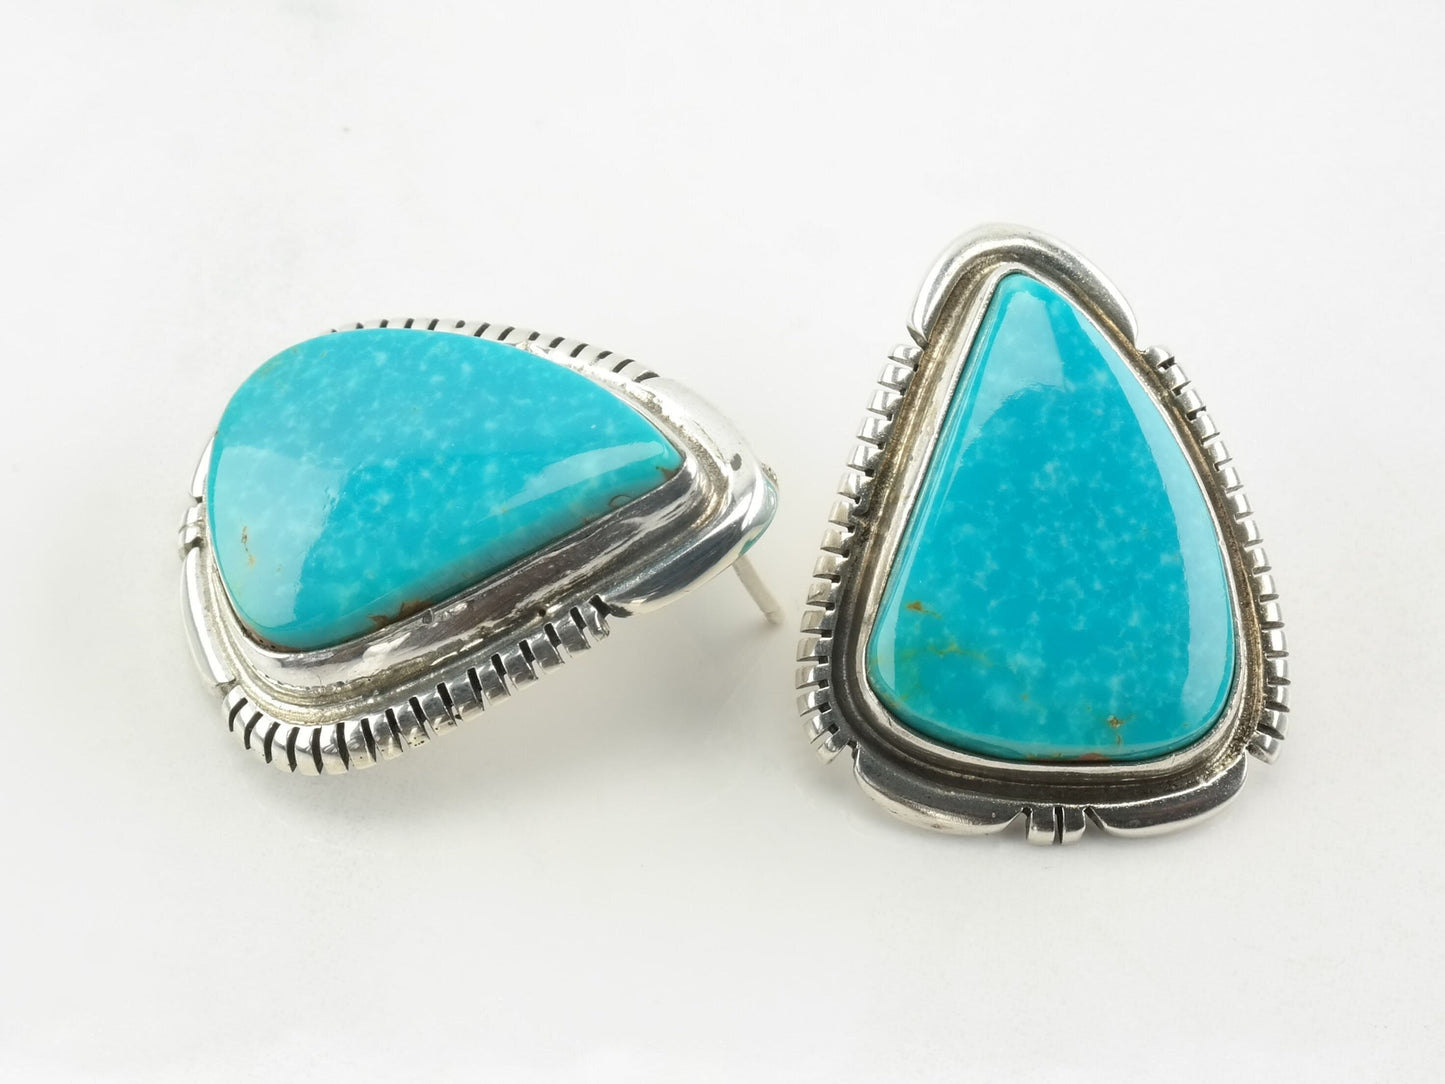 Native American Navajo Sterling Silver Turquoise Triangle Earrings Stud